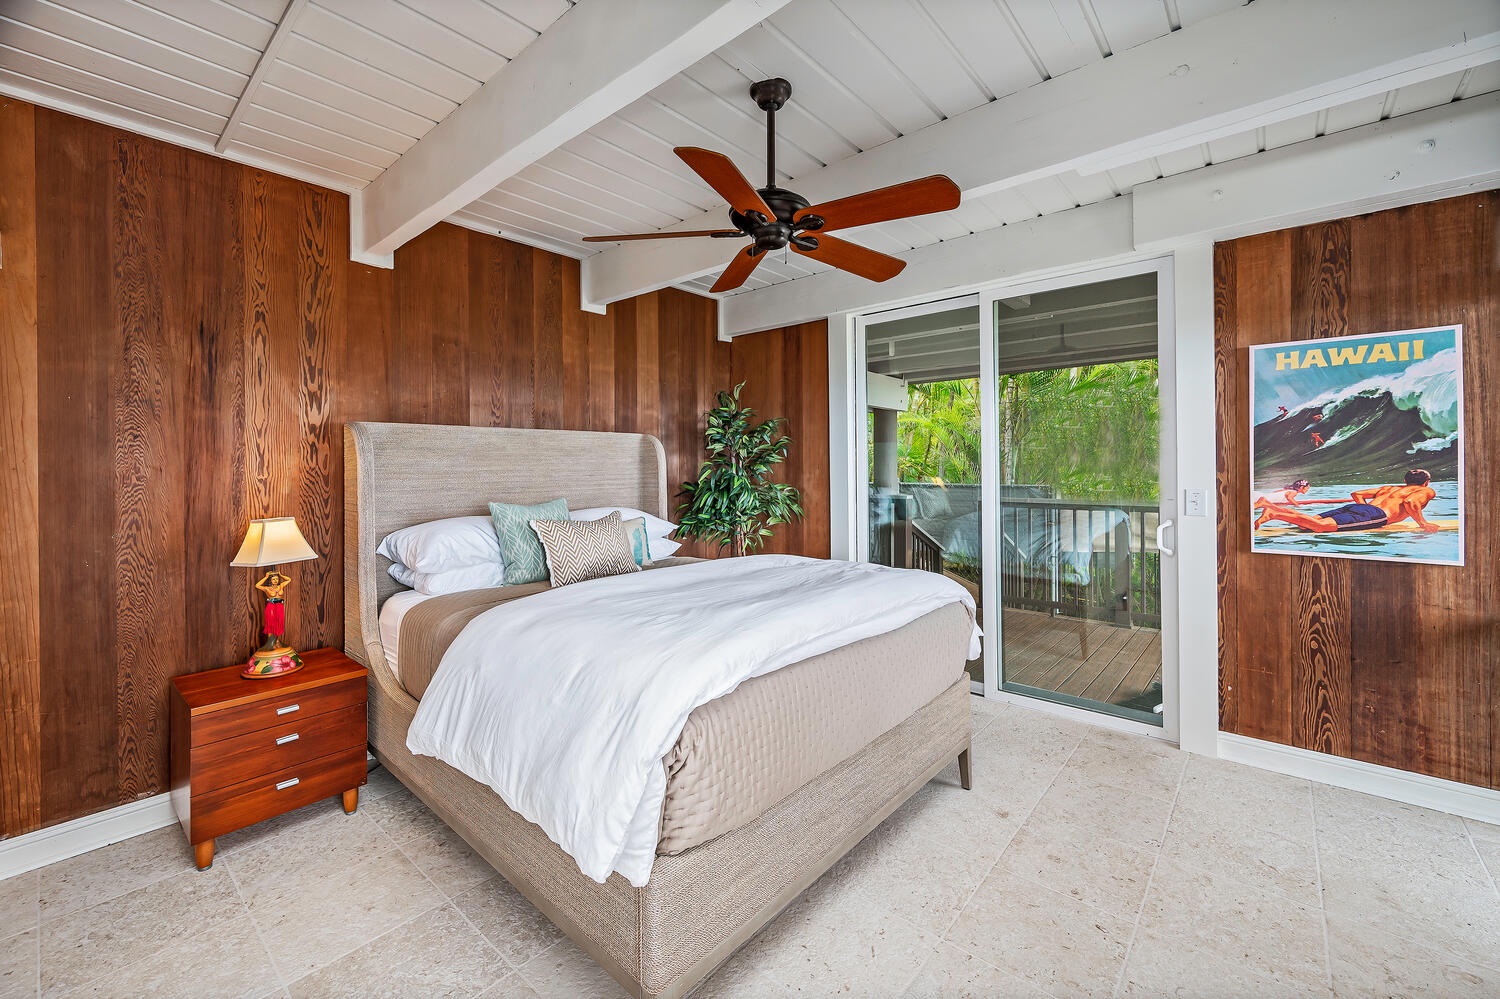 Kailua Vacation Rentals, Hale Lani - Guest bedroom 2 with queen